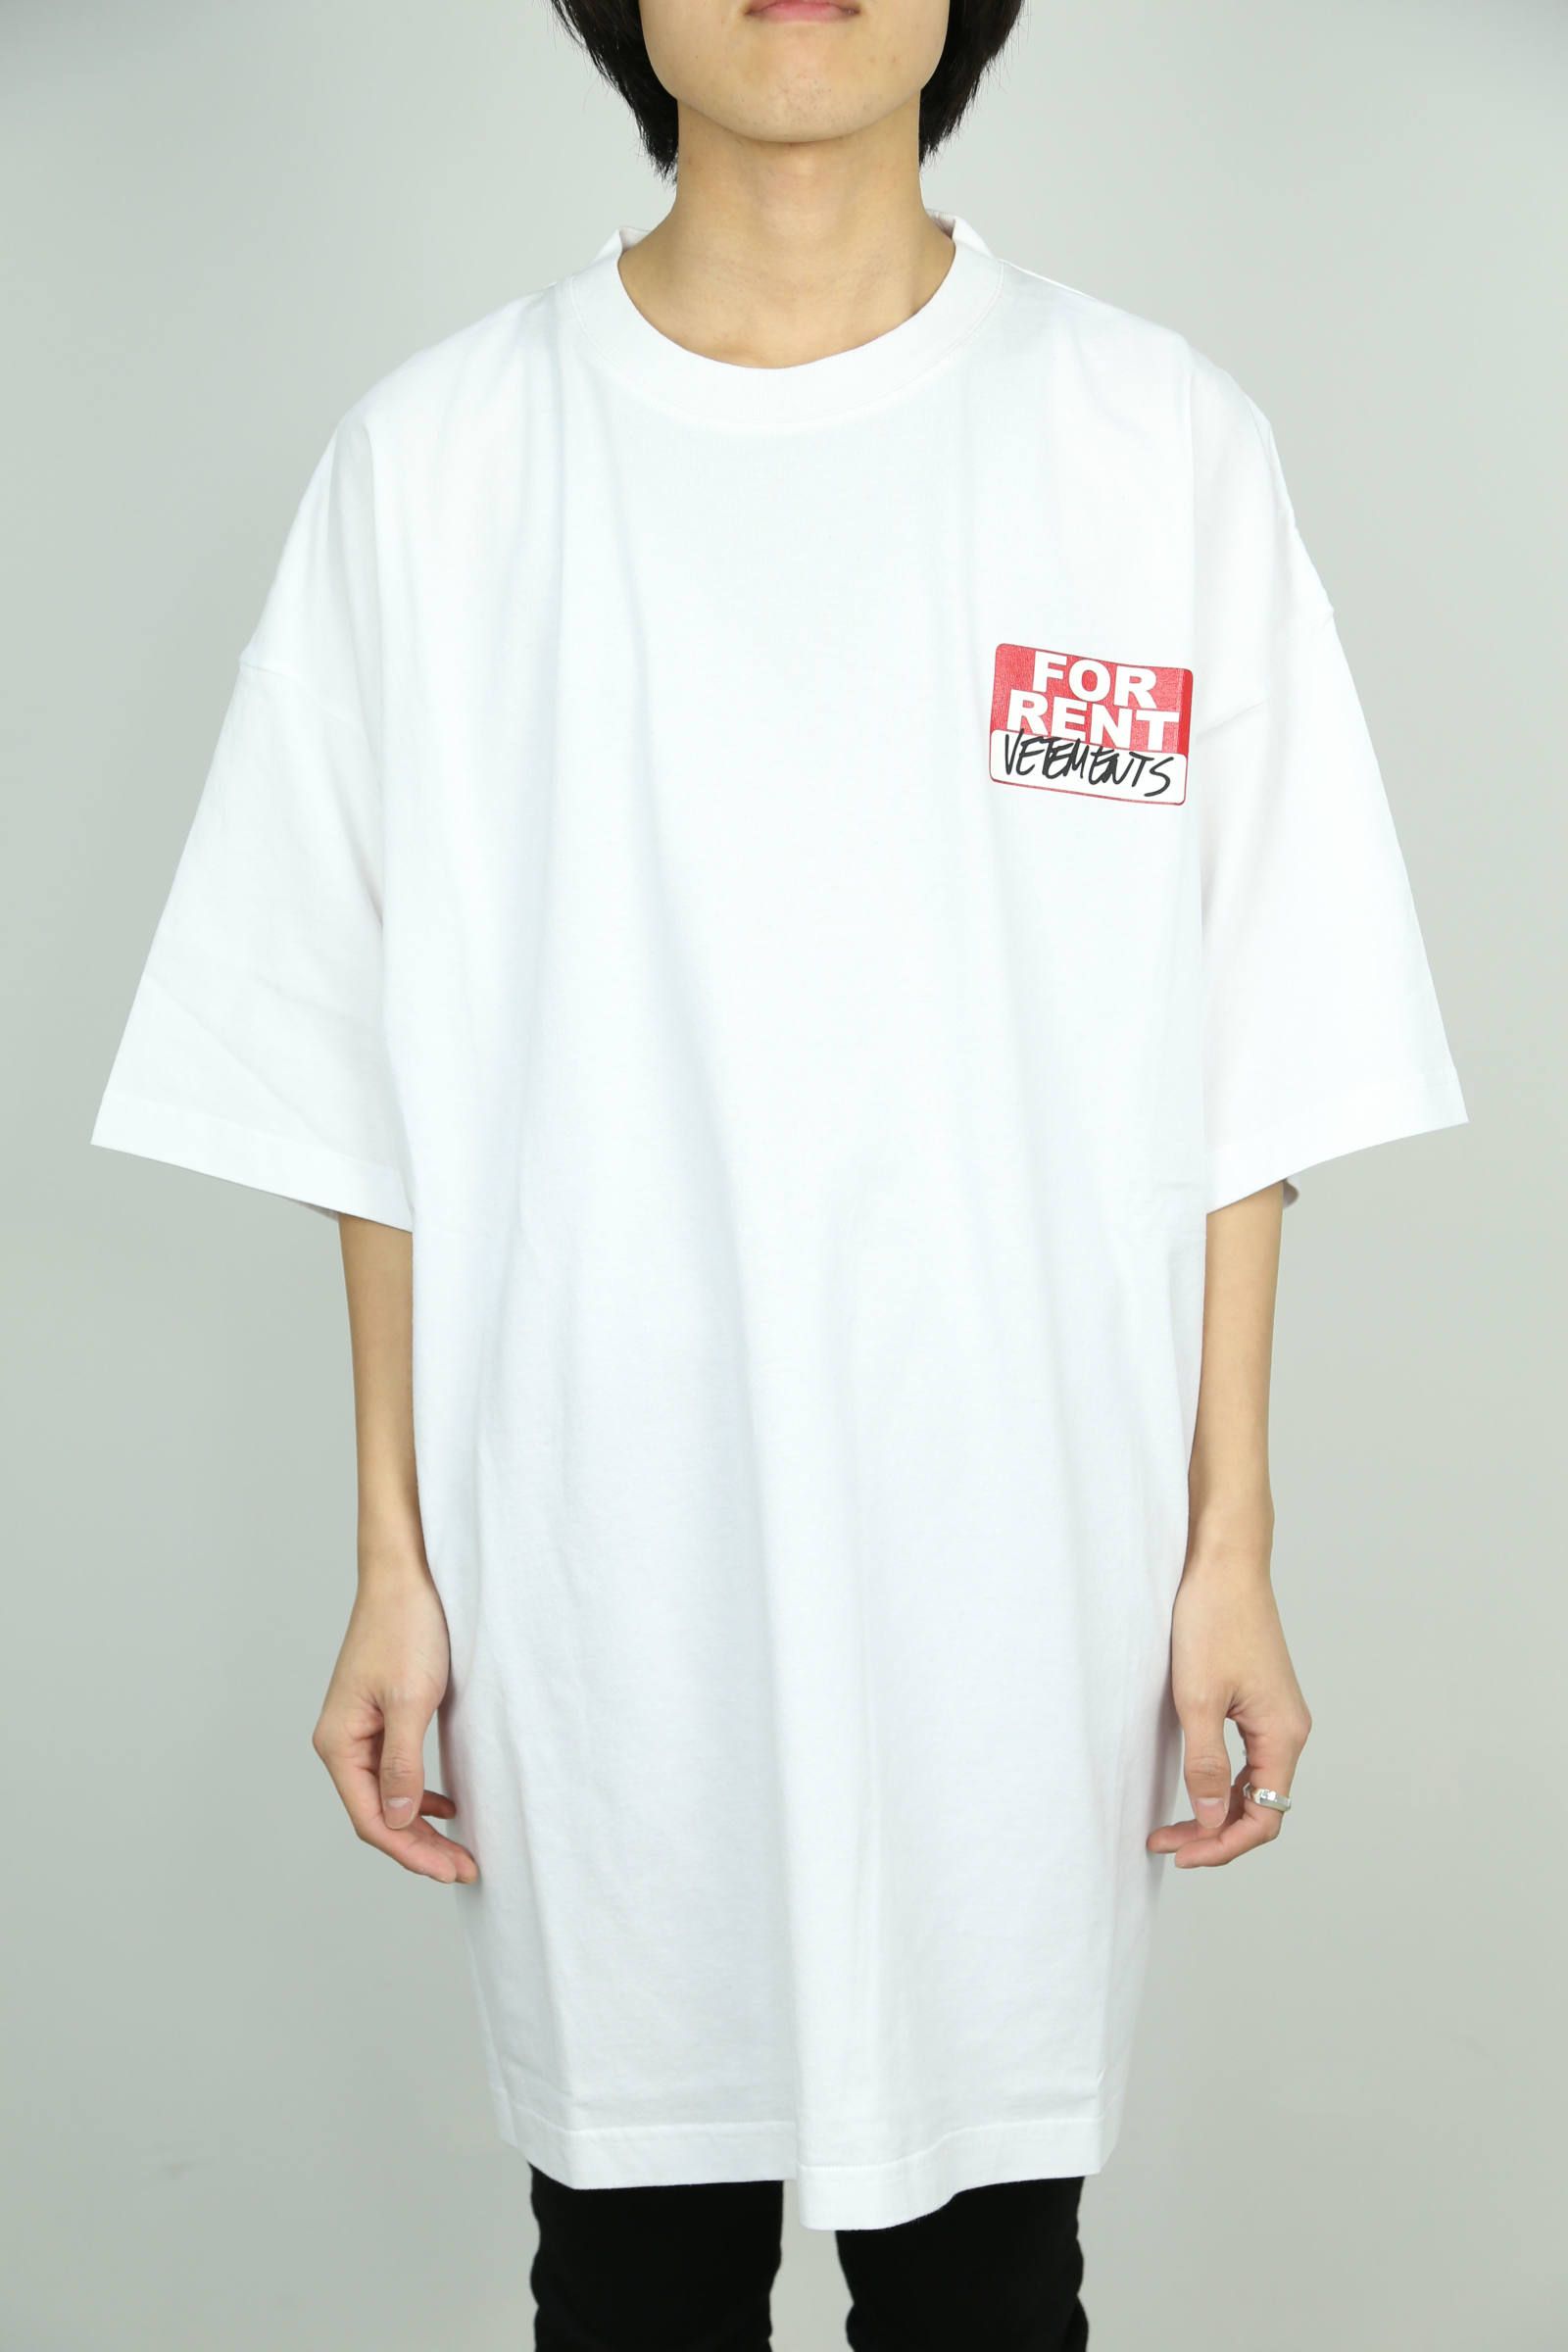 FOR RENT T-SHIRTS / ホワイト - S